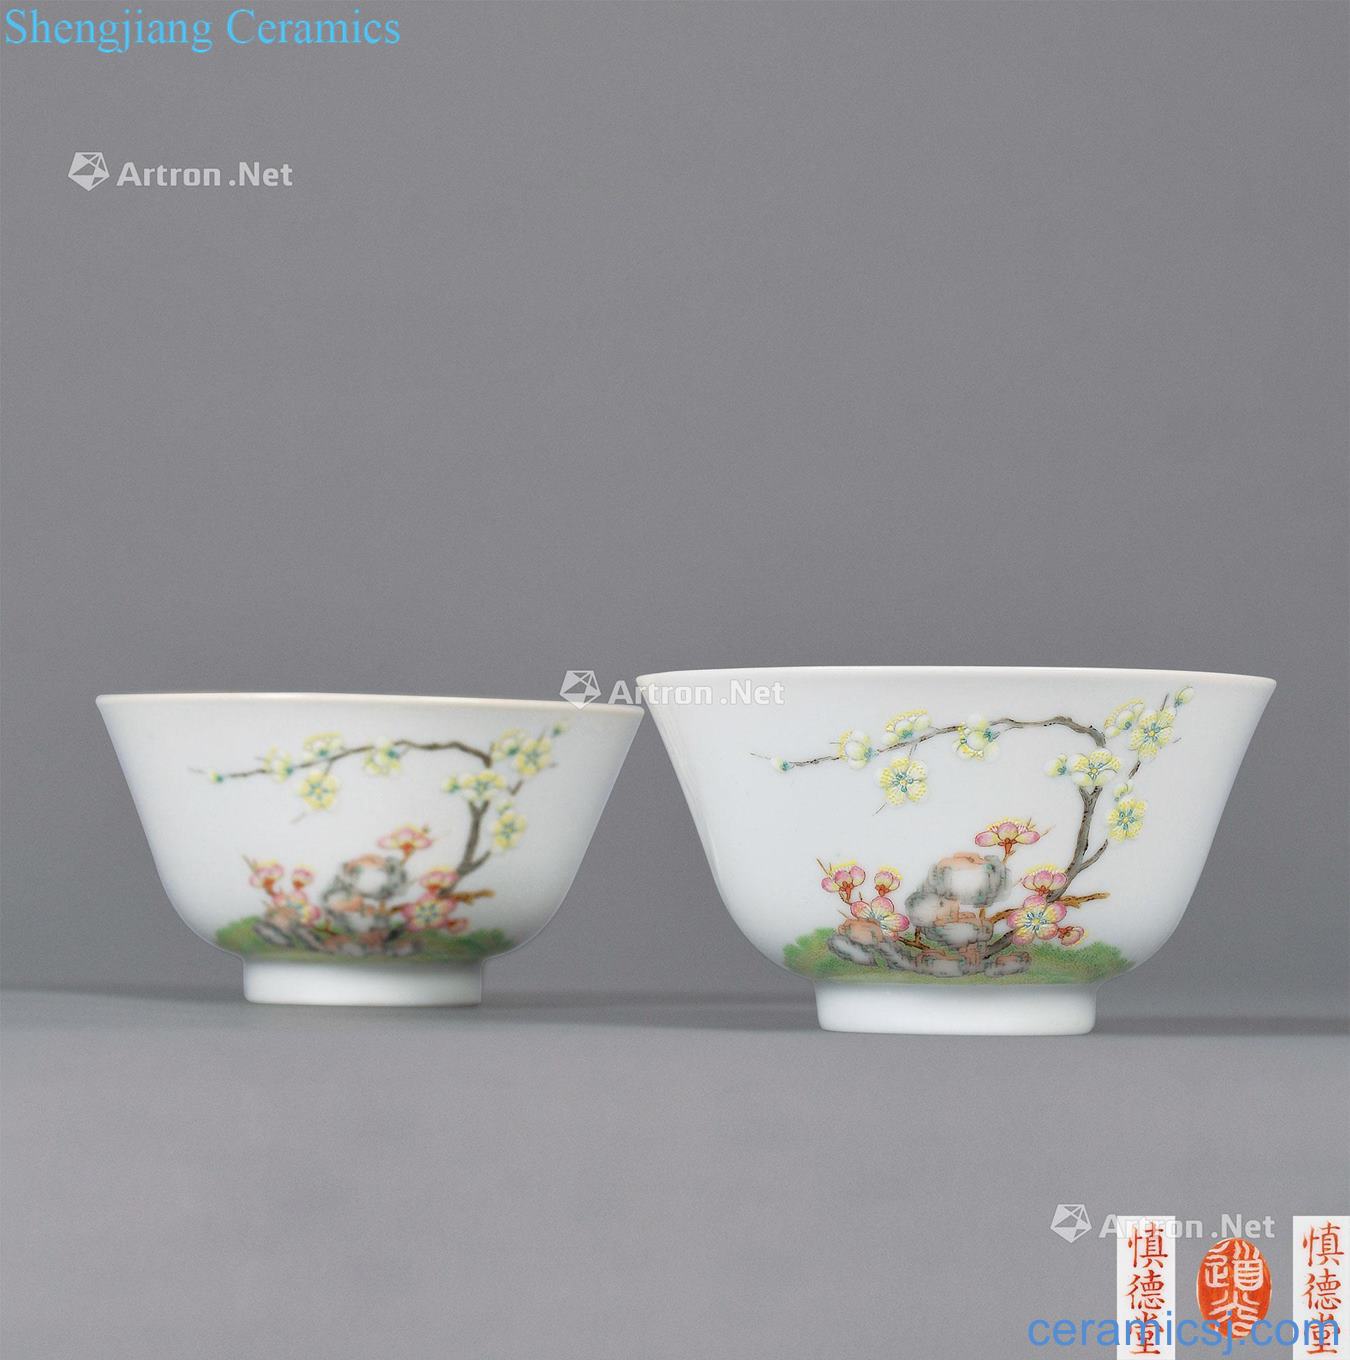 Qing daoguang The imperial kiln ShenDeTang pastel poetry cup